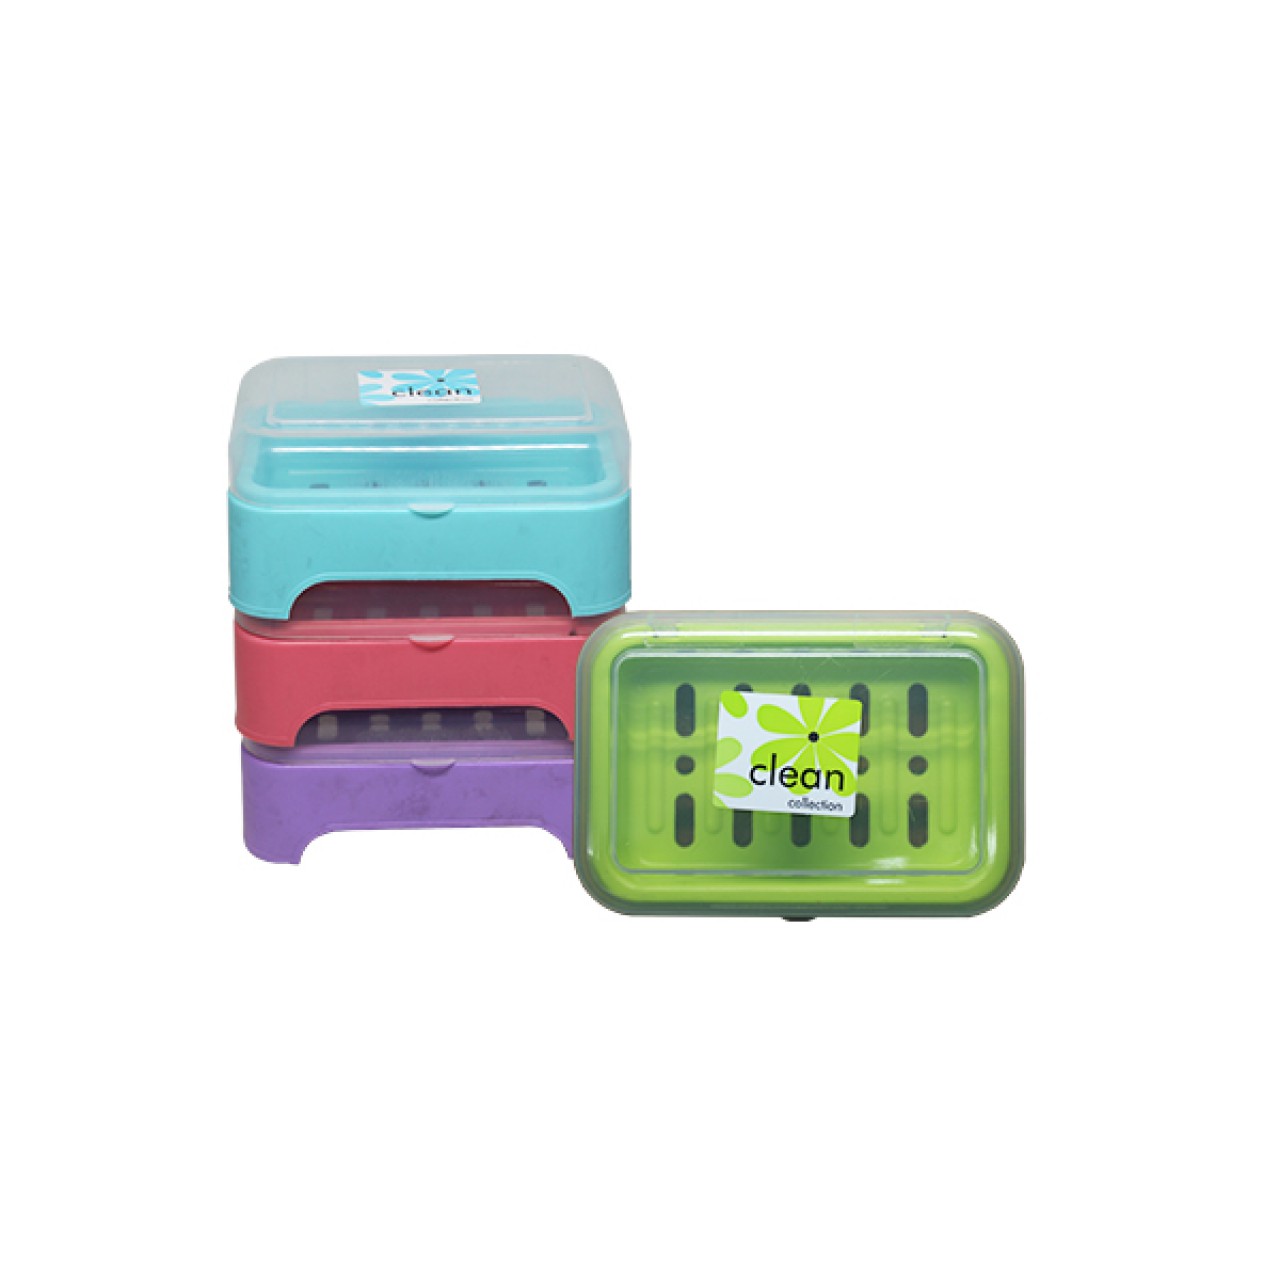  SINGLE SOAP TRAY 1216C (ASSORTED COLOR)  